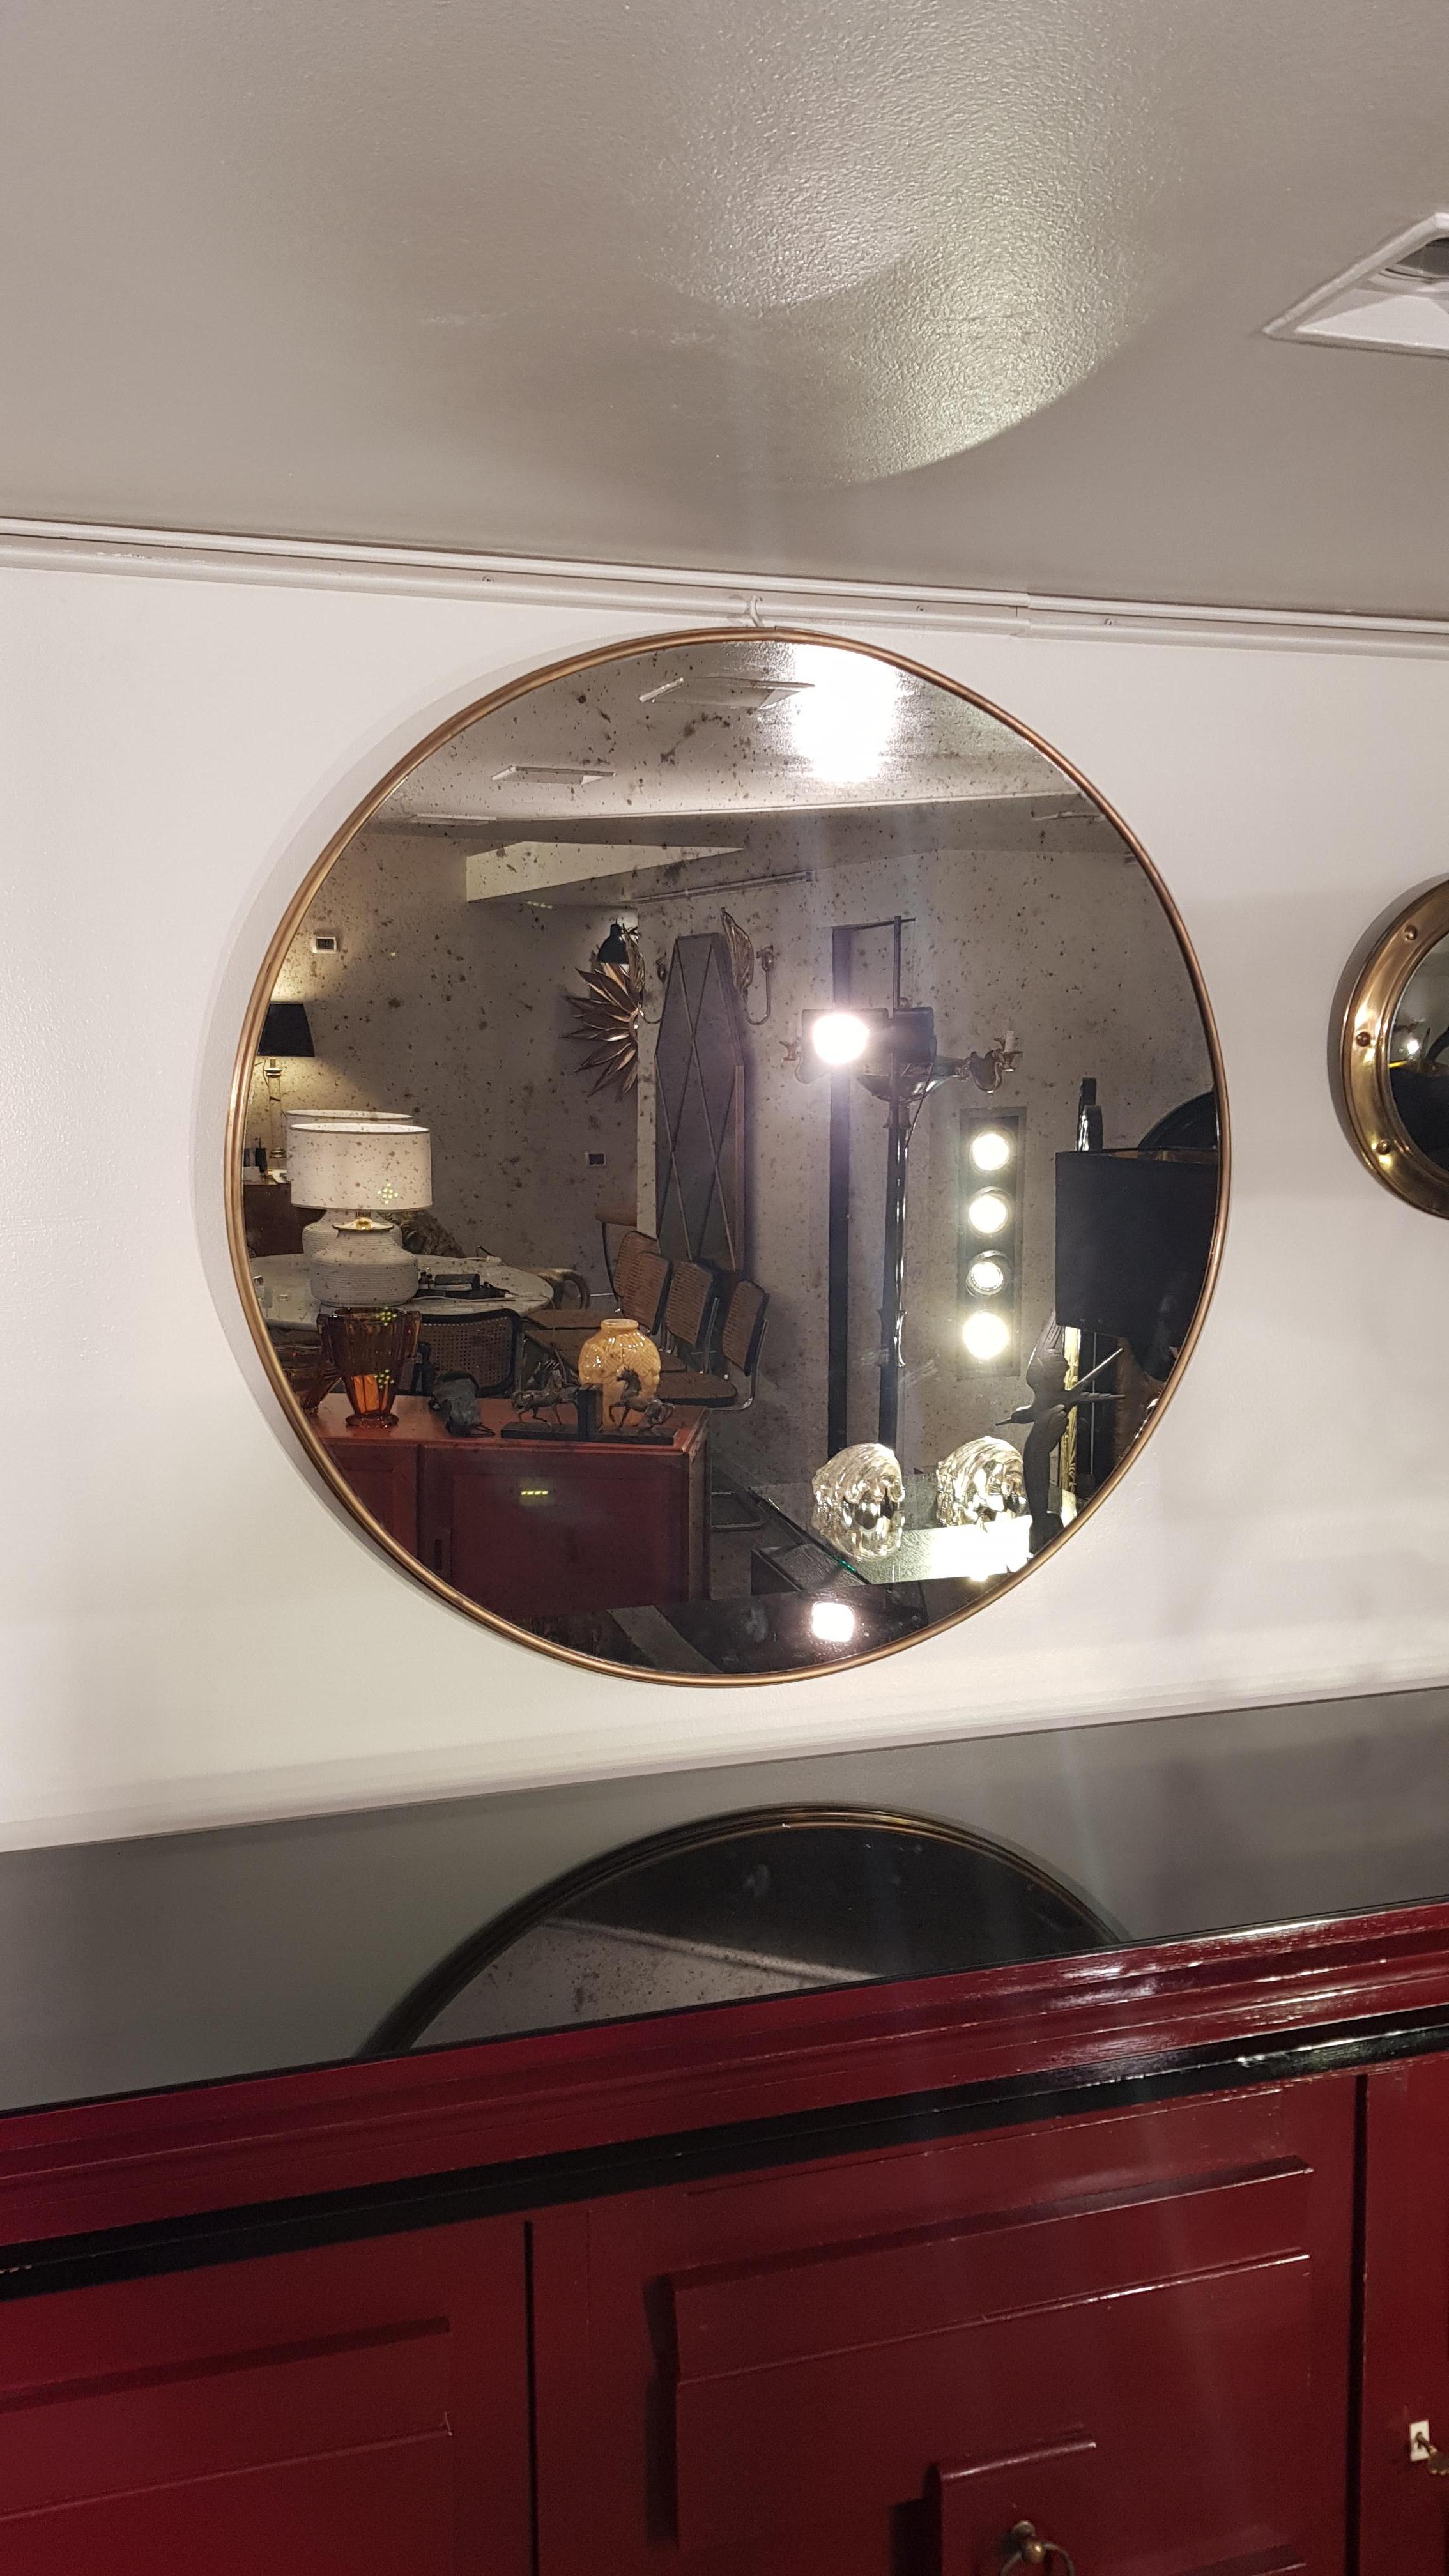 Pescetta presents its collection of contemporary customizable mirrors. 

With brass frame, window pane look and brass studs these mirrors replicate the idea of early 20th century Art Deco style mirrors. They suit both modern spaces which need a